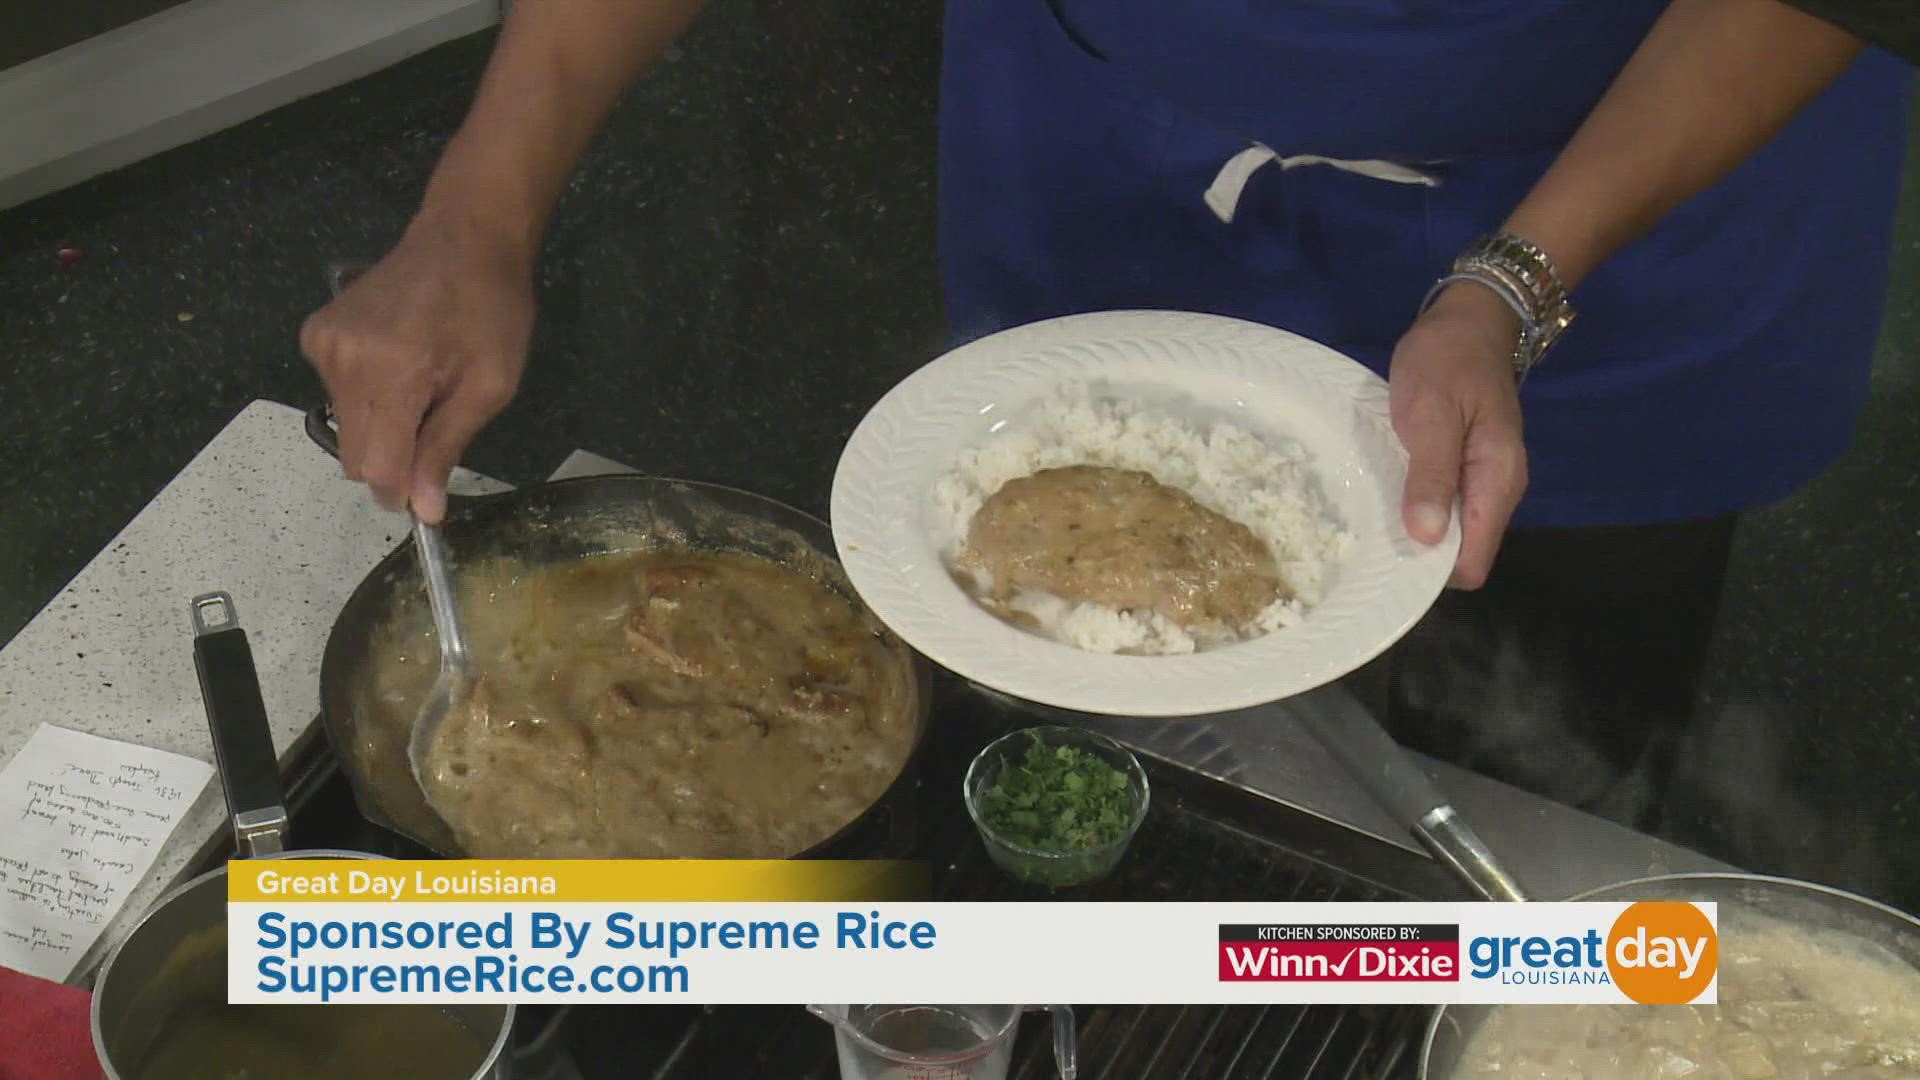 Chef Kevin Belton shares an easy meal for your next week night dinner using Supreme Rice.